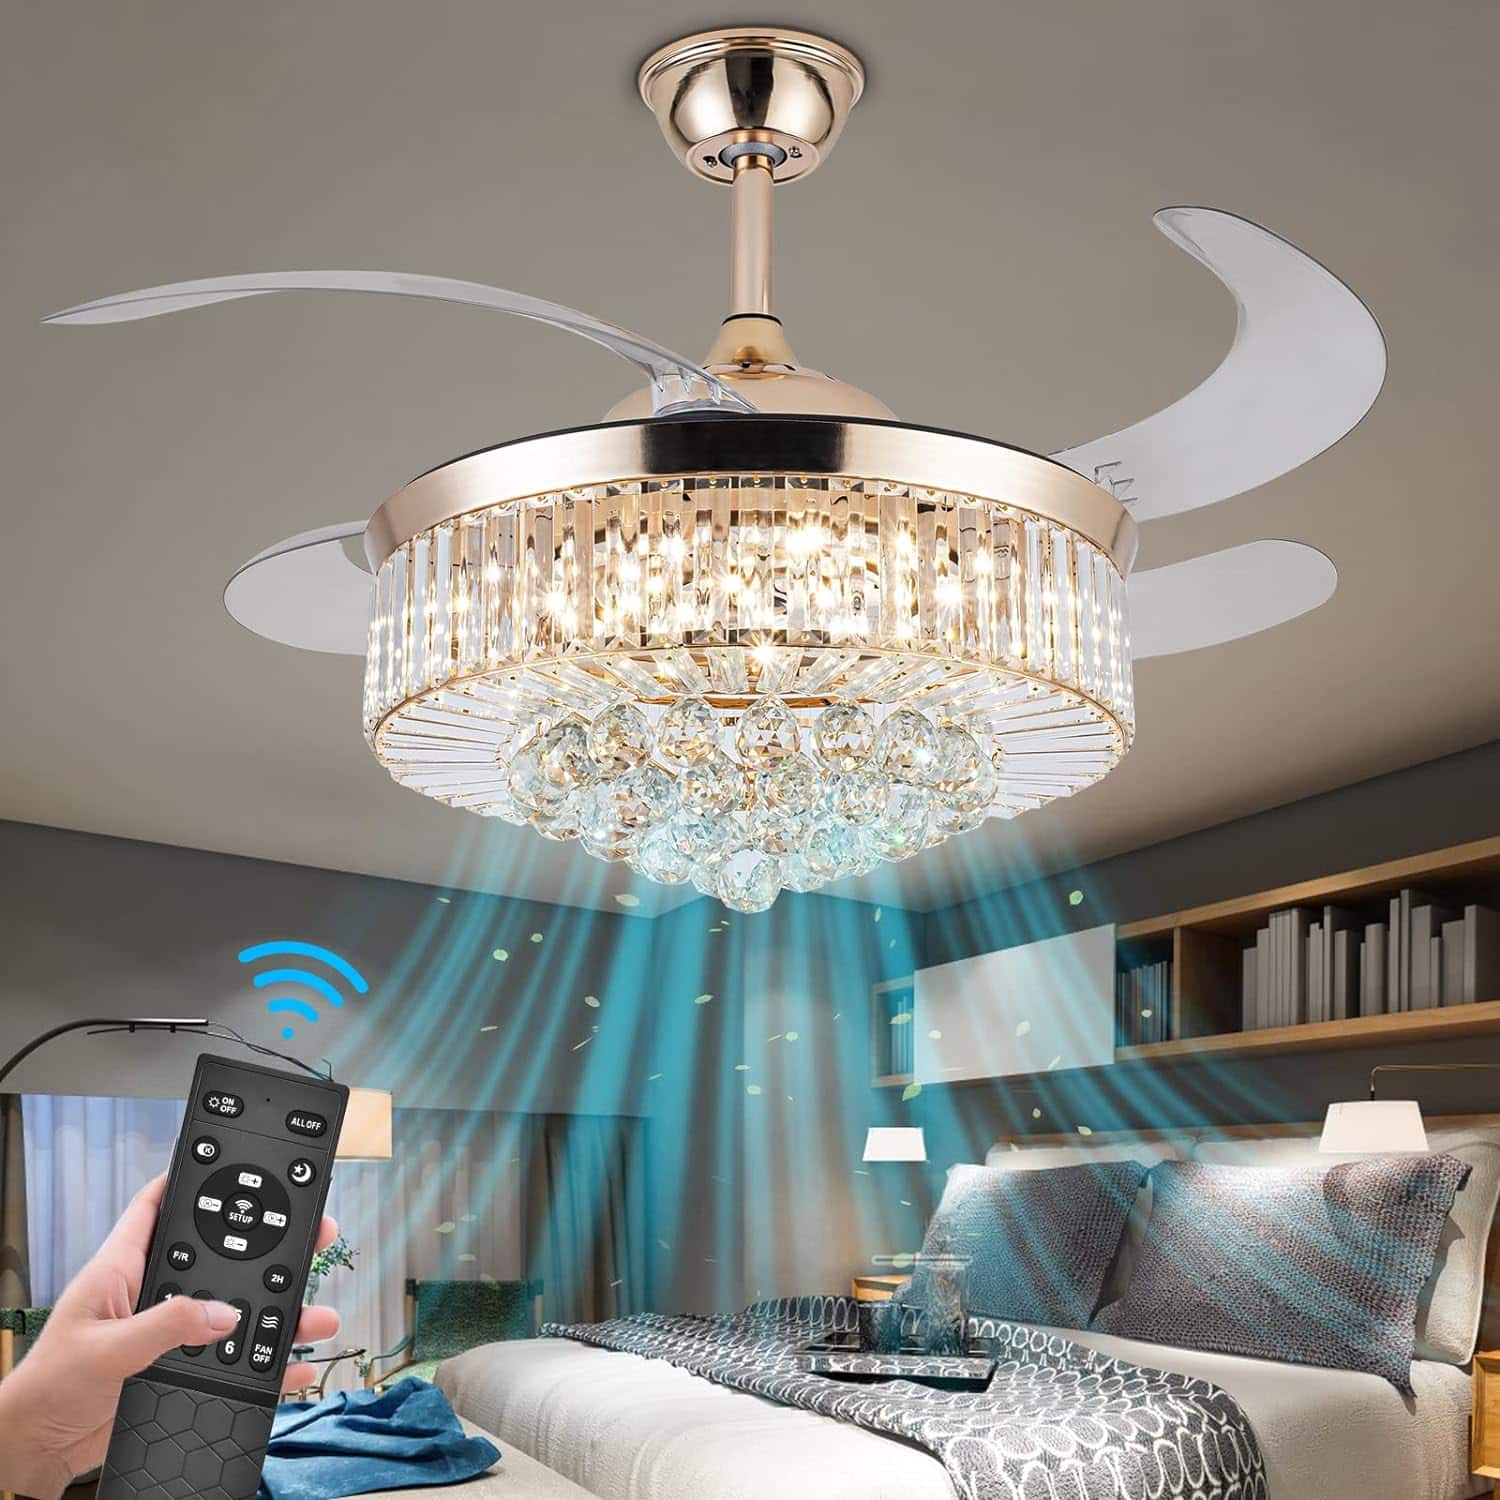 36 Stepless Dimming Chandelier Crystal Ceiling Fan with Lights, Reversible Modern Fandelier with Remote Retractable Invisible Blades 6 Speeds Indoor Ceiling Fan Light for Living Room Bedroom Kitchen